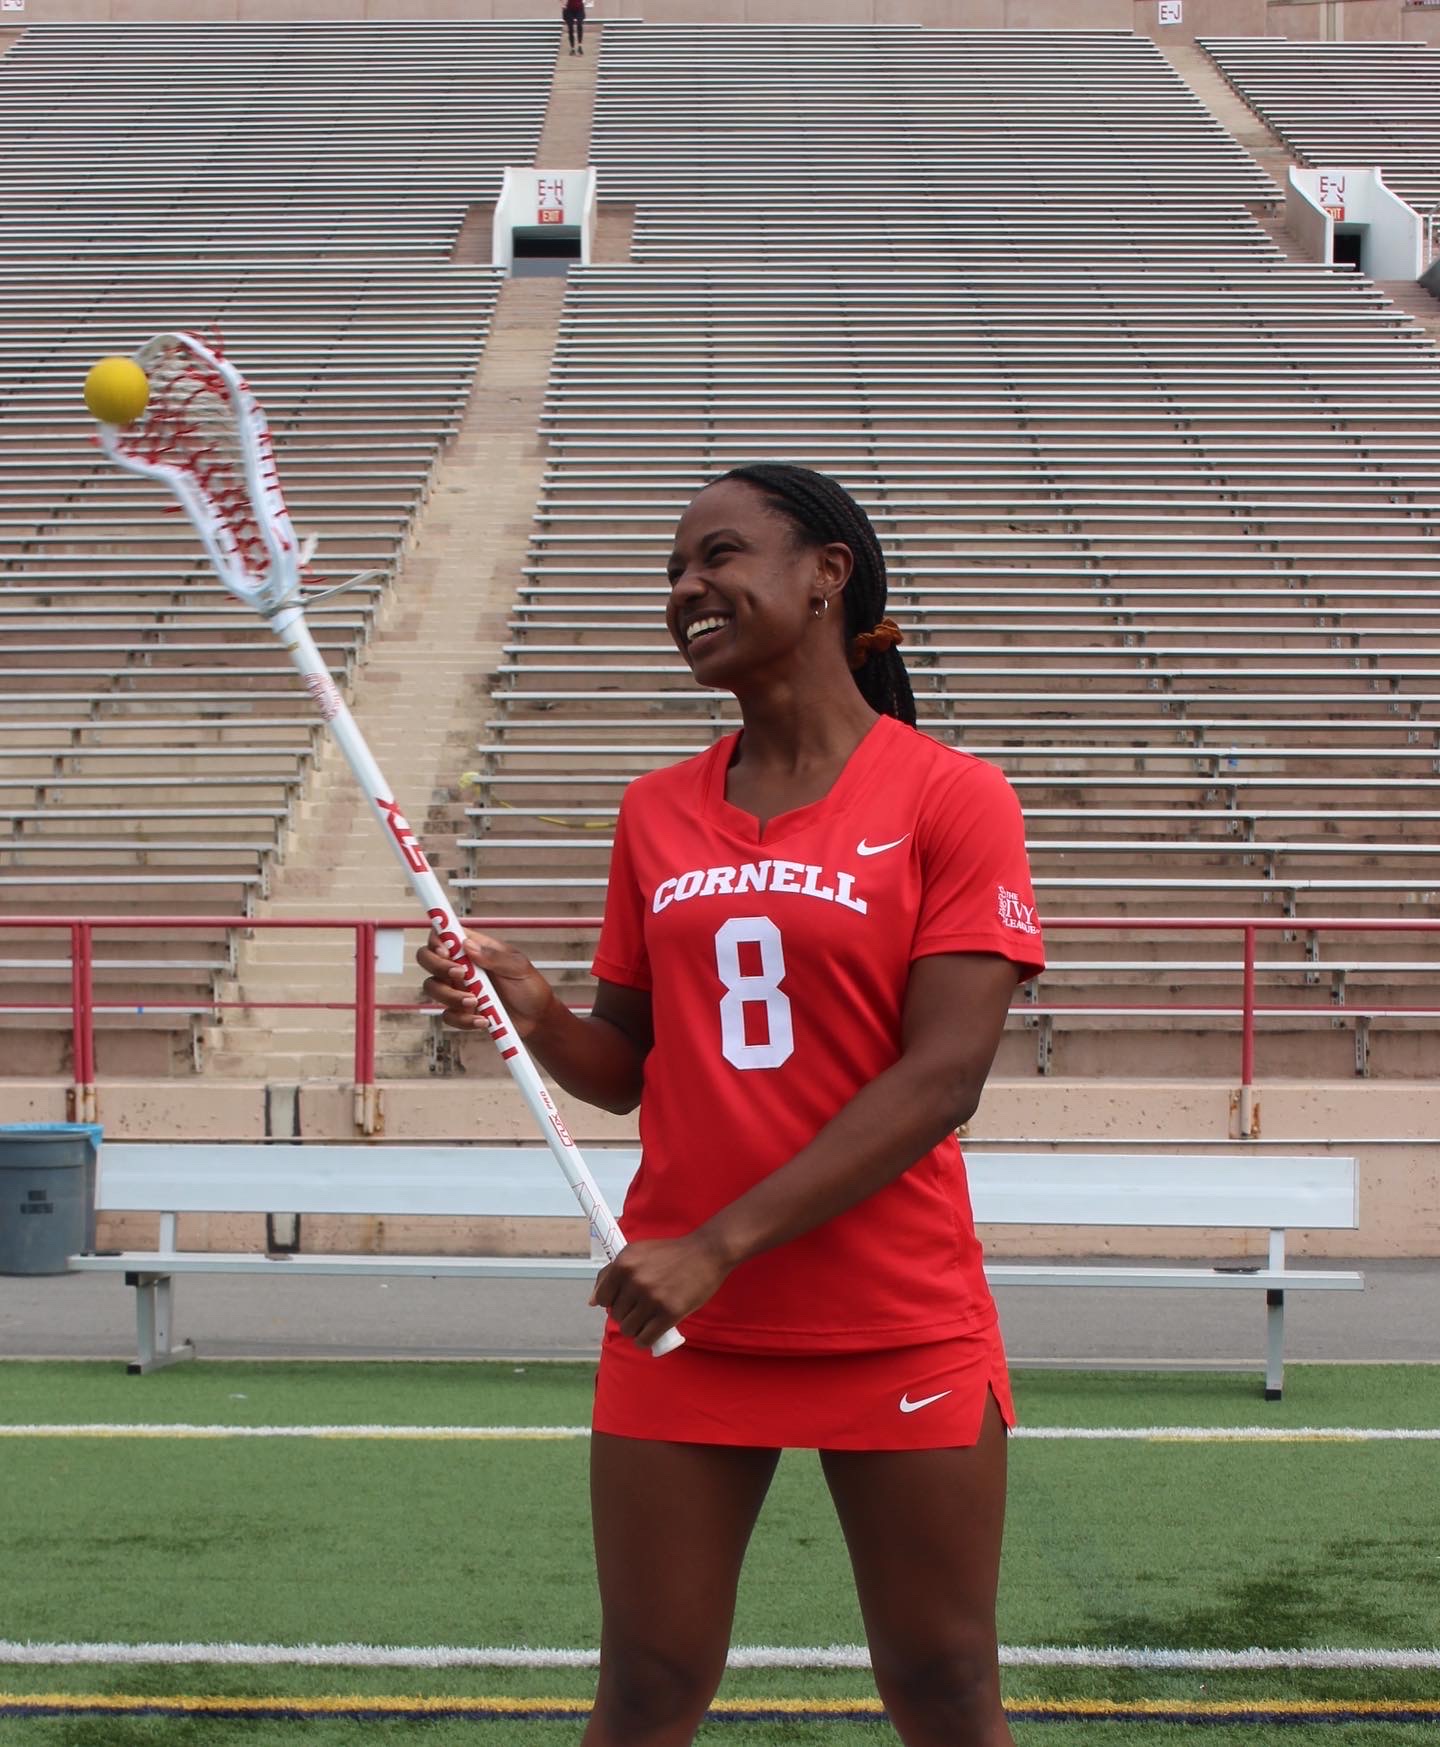 Cornell Lacrosse player Ashleigh Gundy '22 poses on the field.